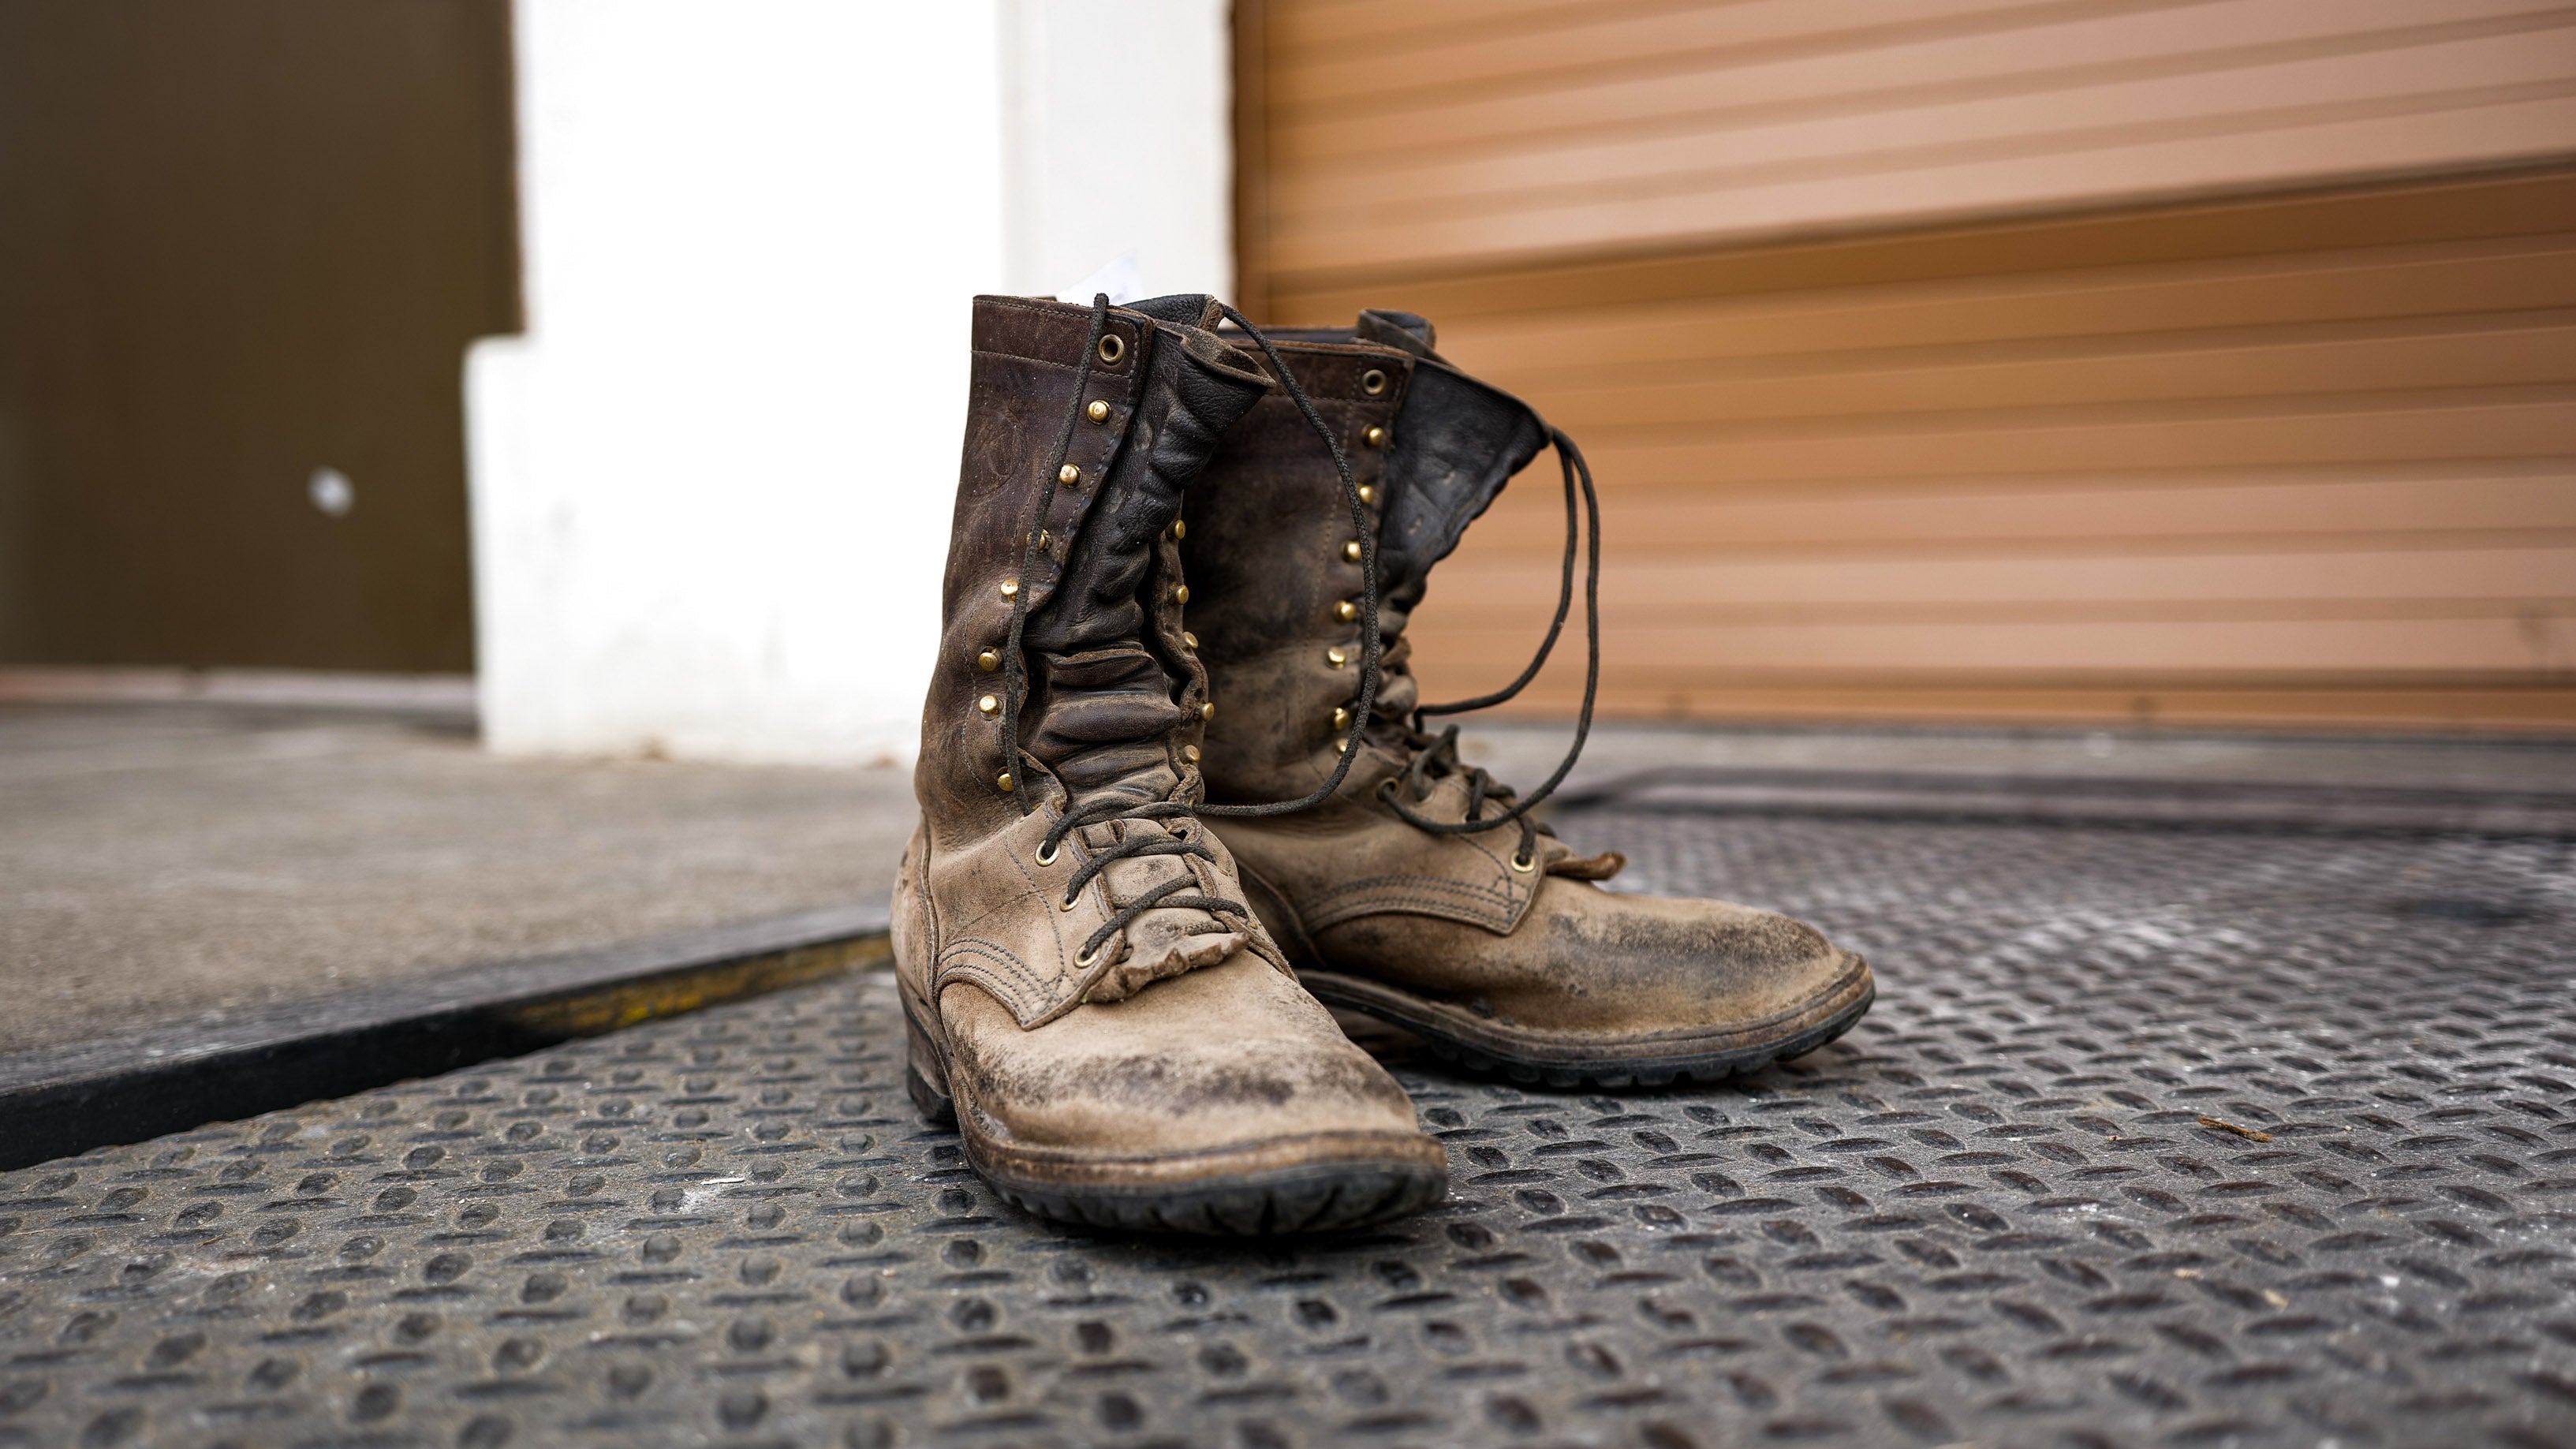 Boot care – JK Boots